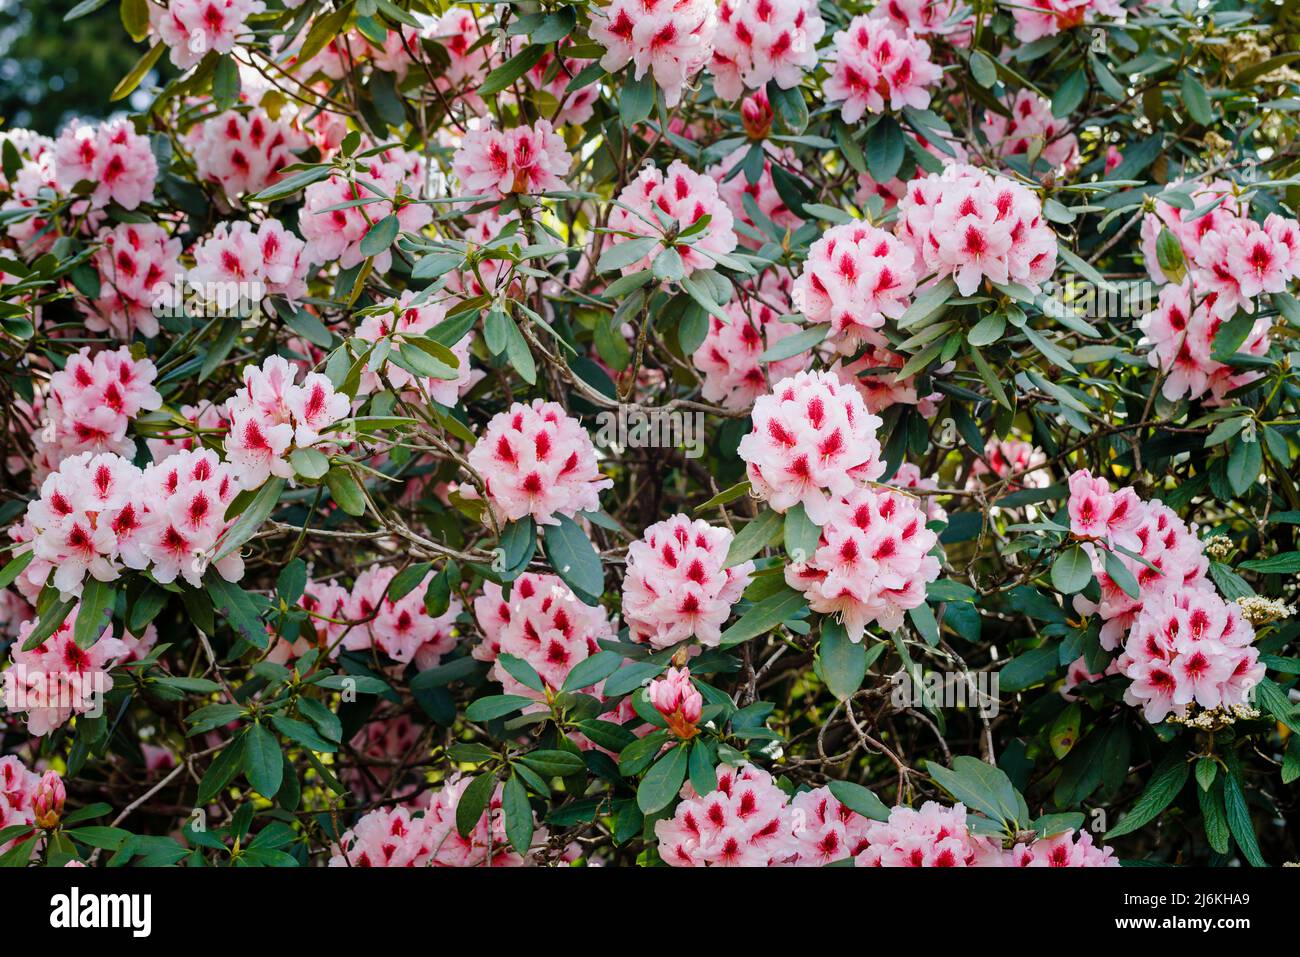 Large rhododendron flower heads with pink petals and mottled deep red throats growing in a garden in Surrey, south-east England Stock Photo